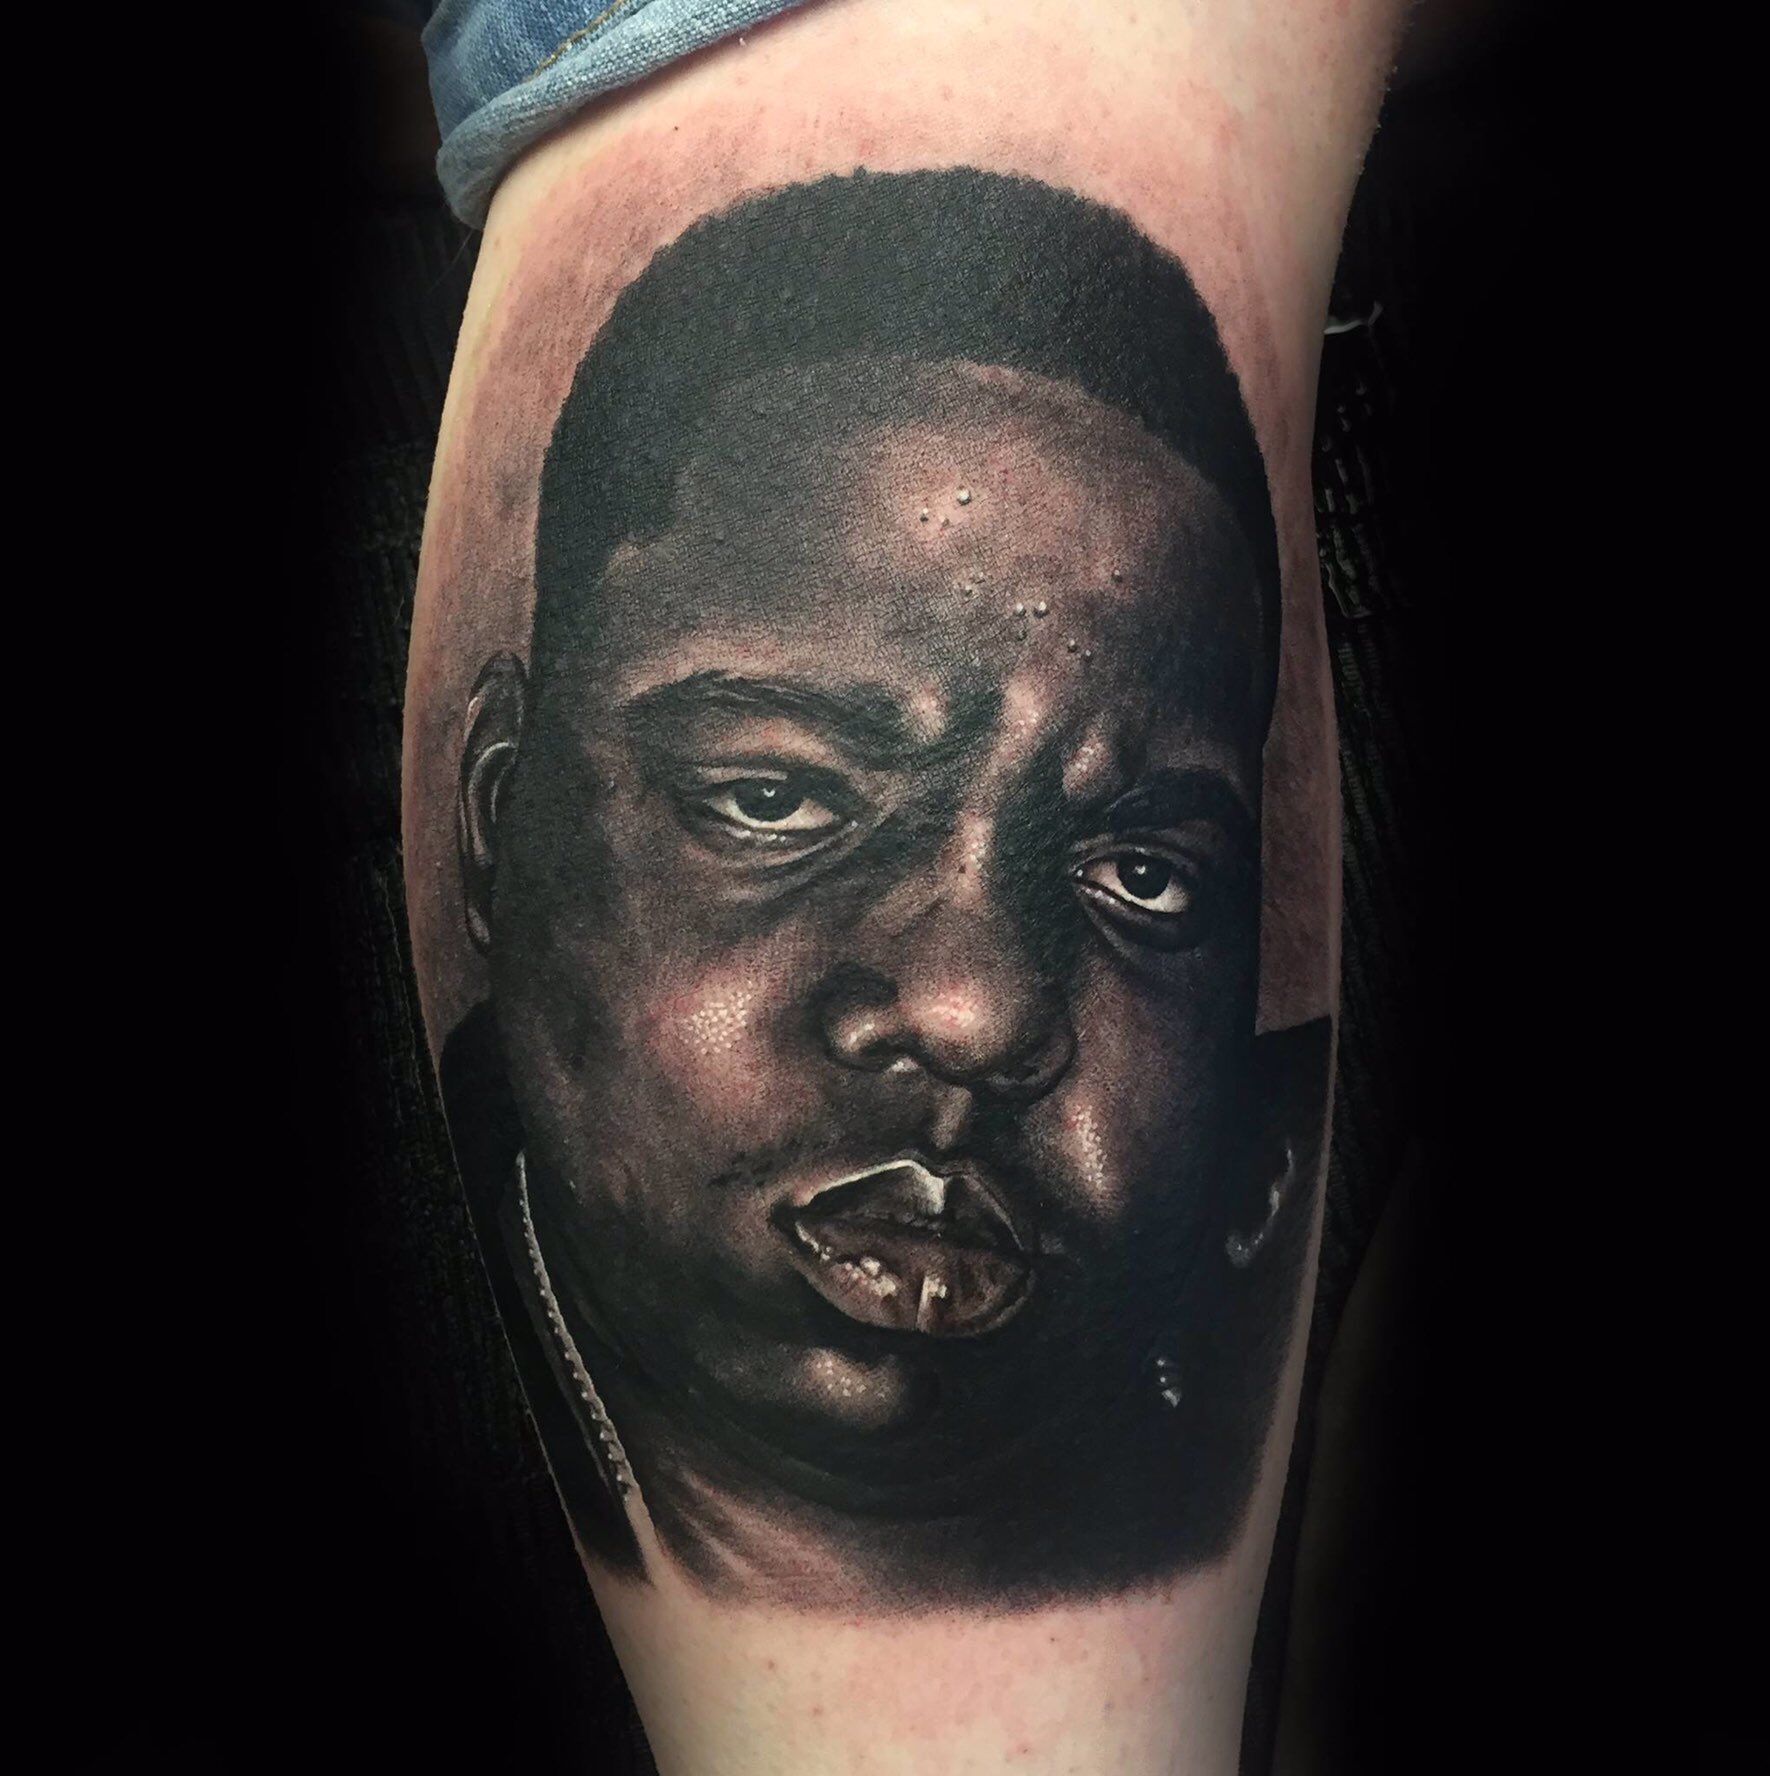 Racist Tattoos Late Rappers Tupac And Biggie On His Buttocks